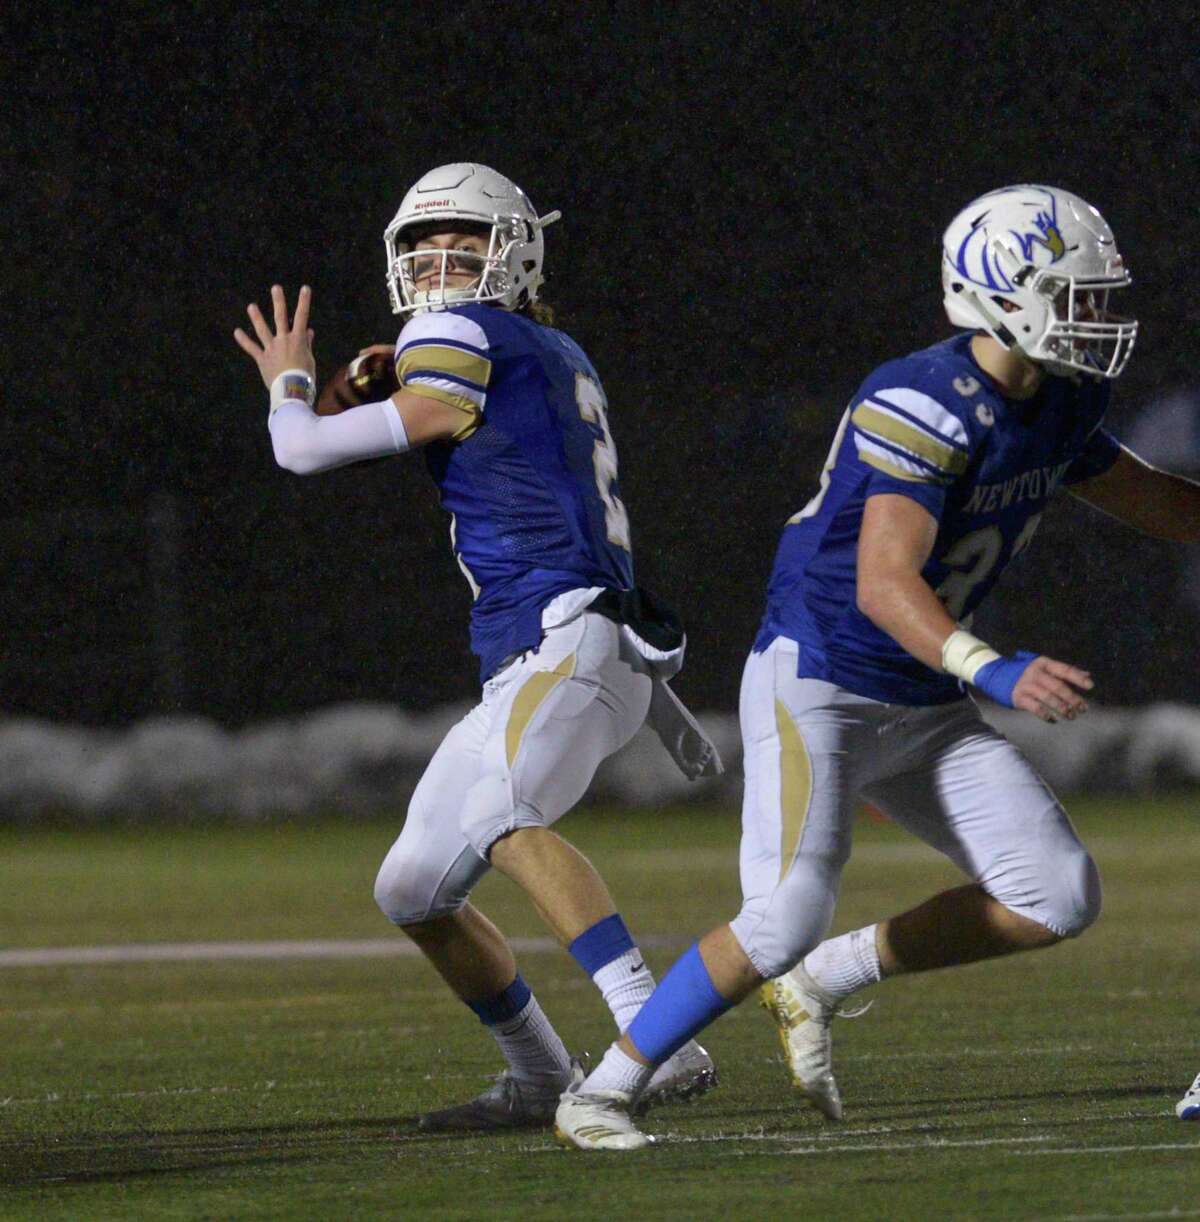 Newtown quarterback John Street looks to pass in the Class LL State Football semifinal game between No 4 Simsbury and No. 1 Newtown high schools, Monday December 9, 2019, at Newtown High School, Newtown, Conn.